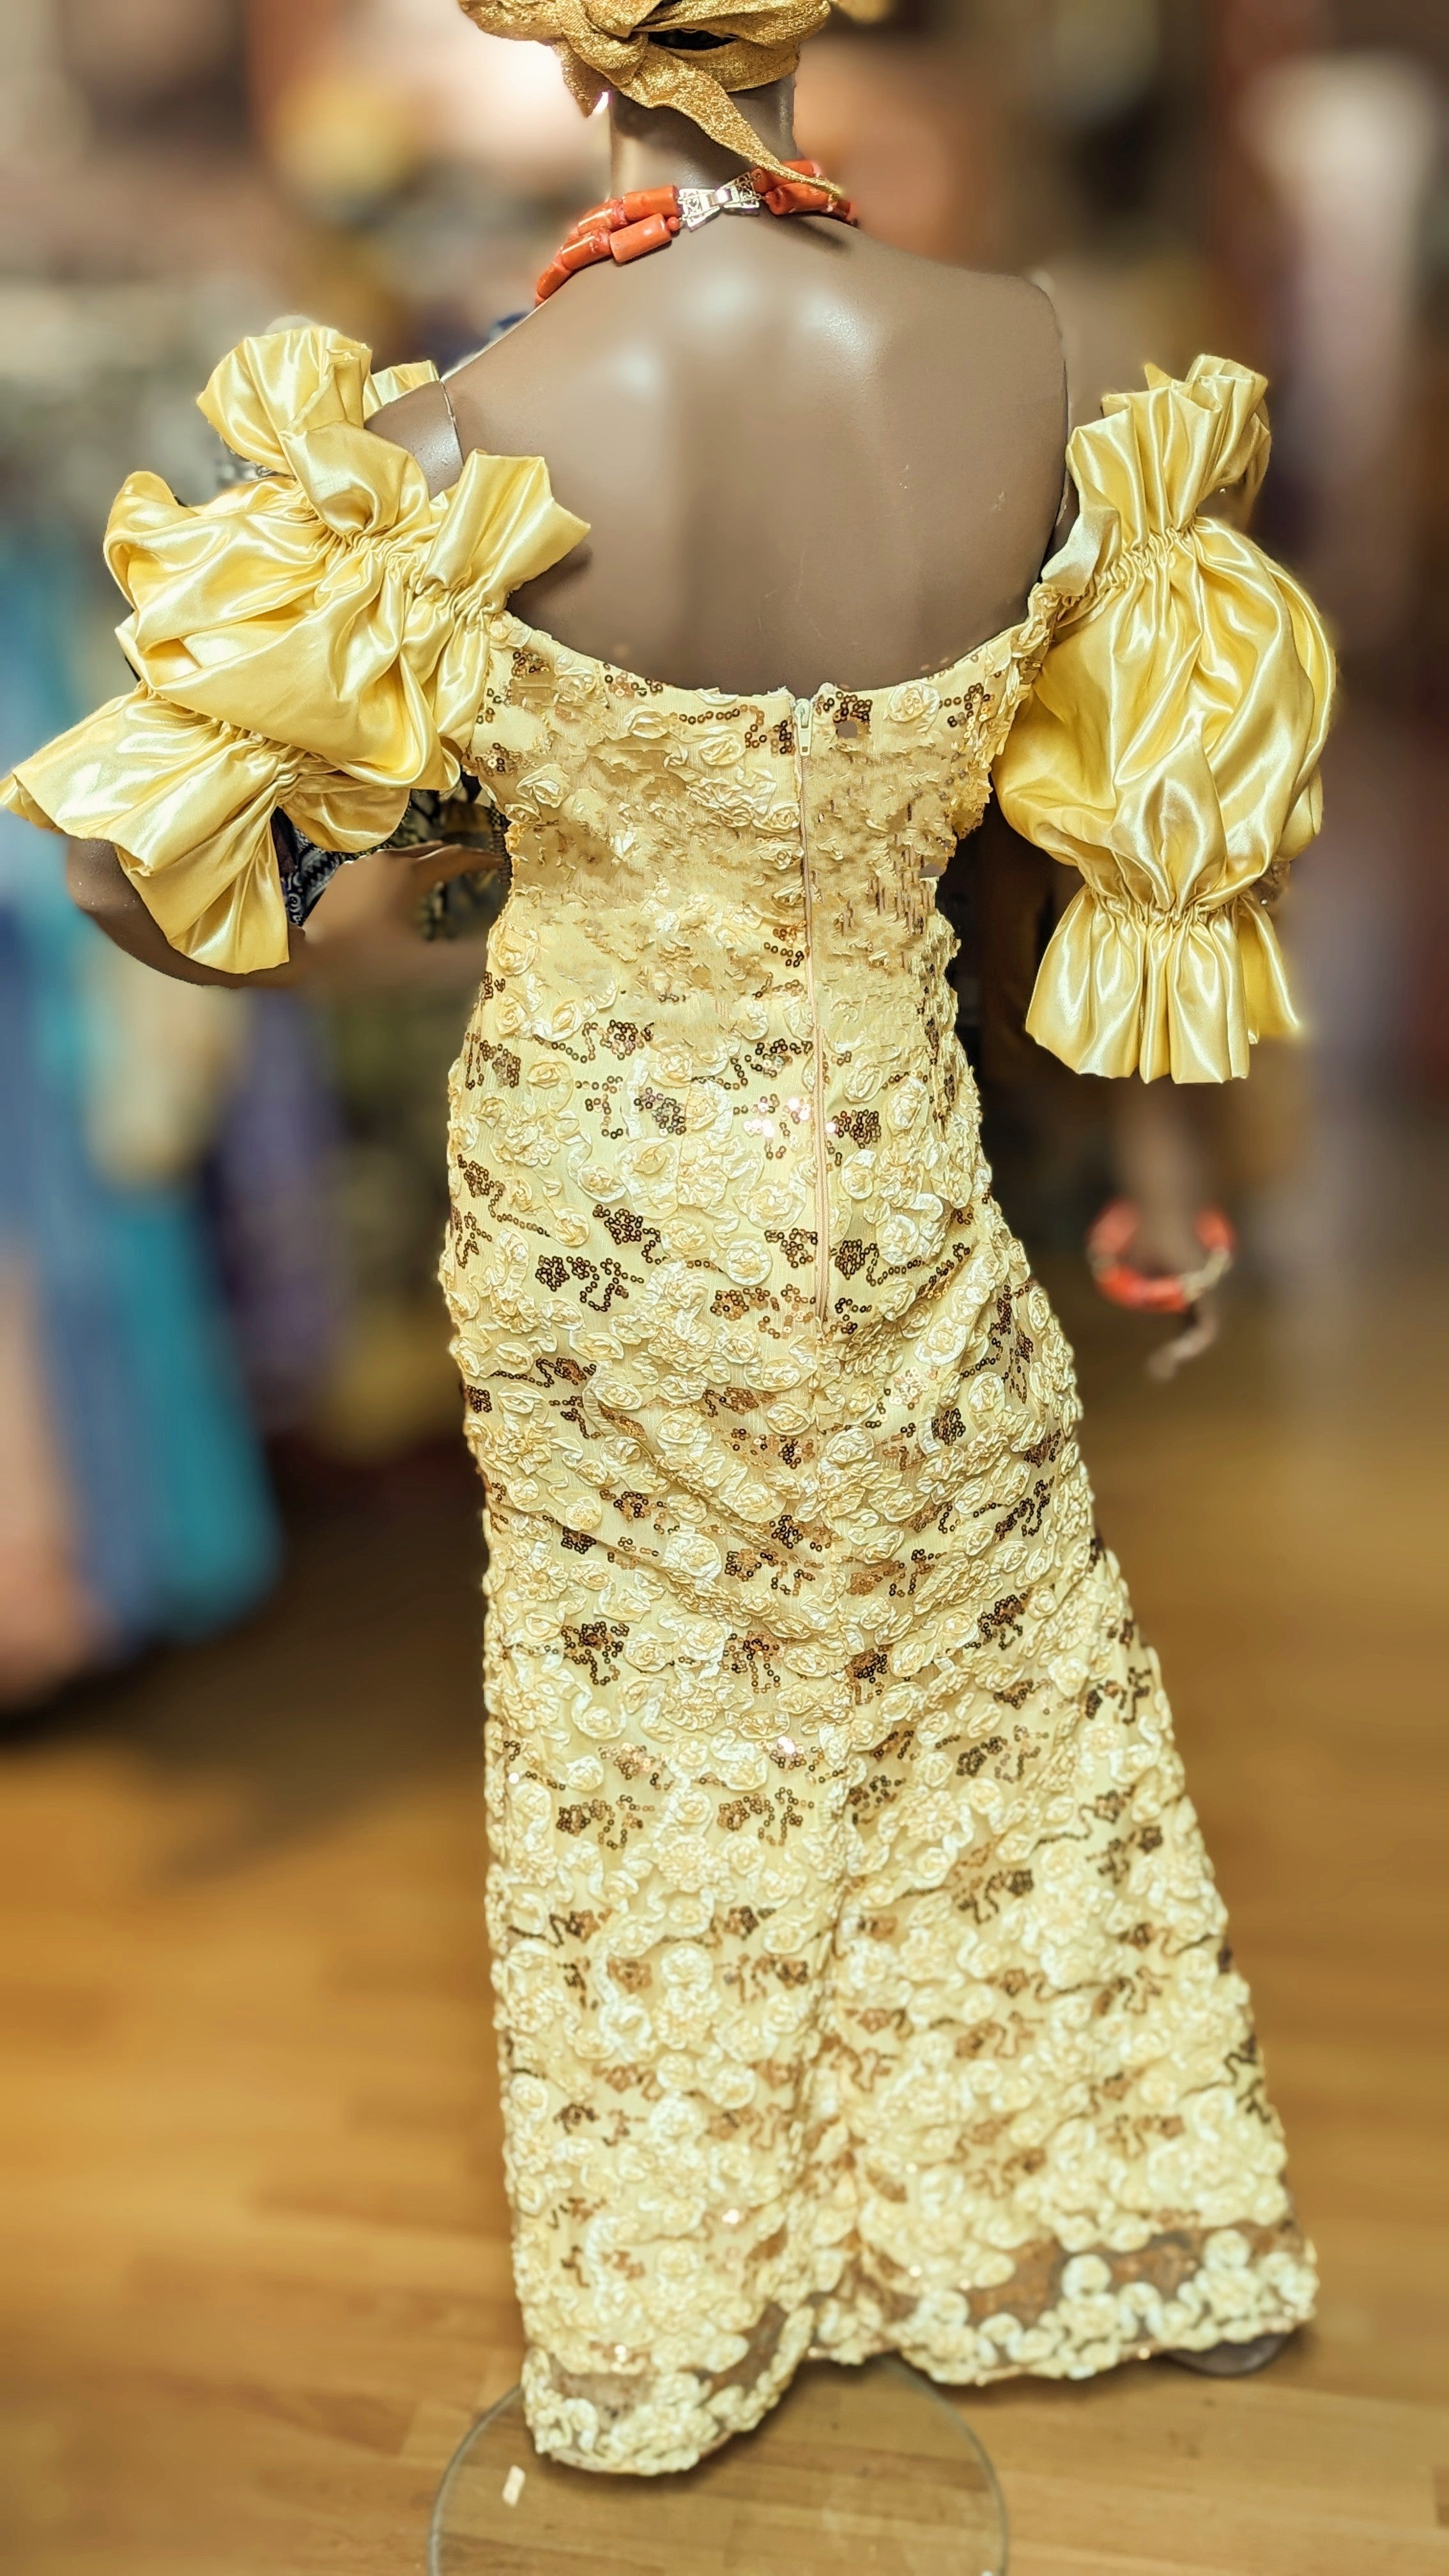 Exquisite Ahebi Yellow Cream African Off-Shoulder Dress with Gold Sequin Embellishments-DPXYCSL2